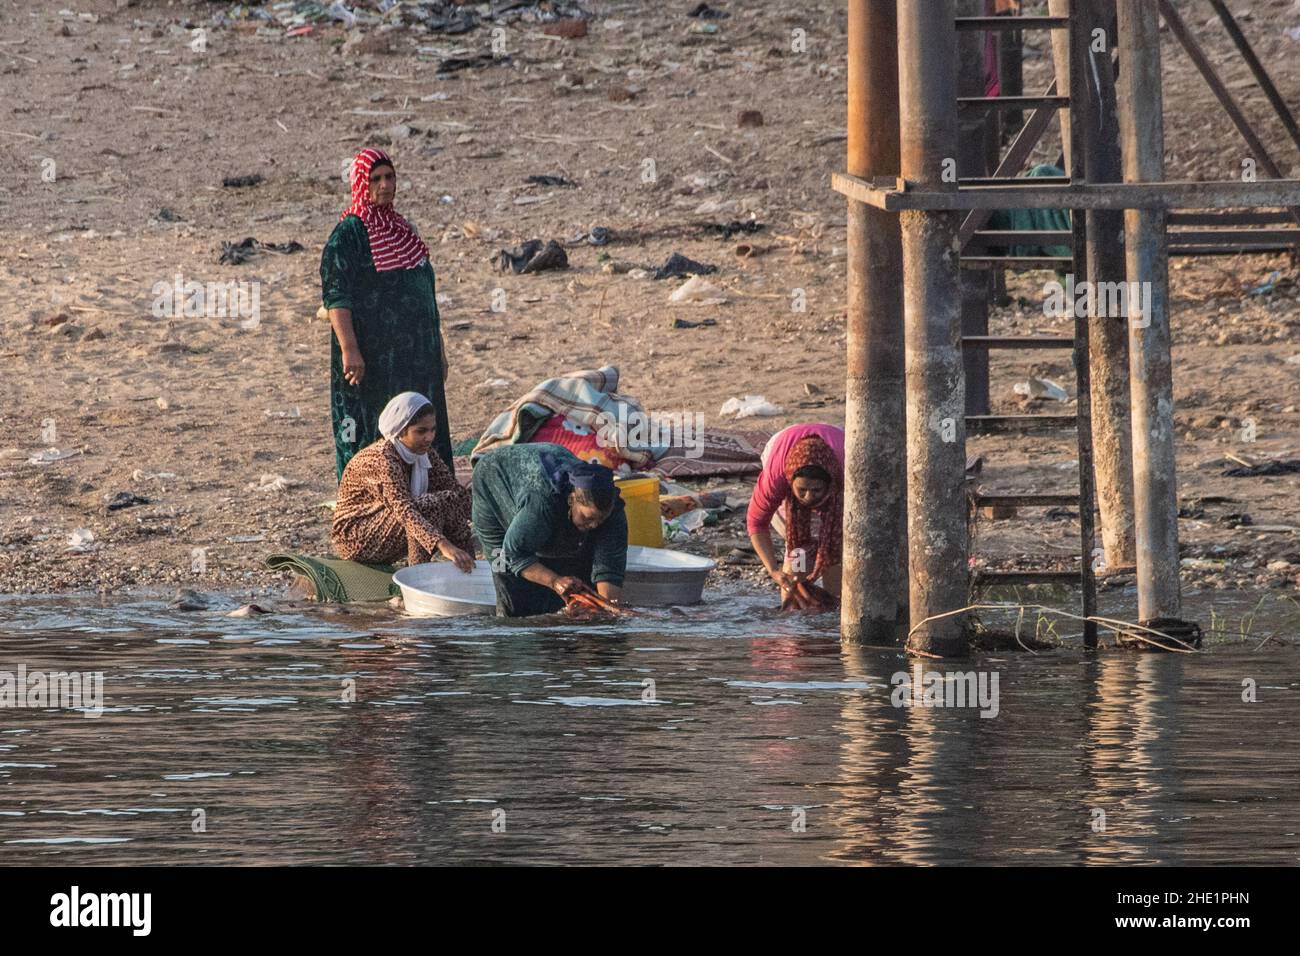 Egyptian women wash clothing and do their laundry in the Nile river. Stock Photo